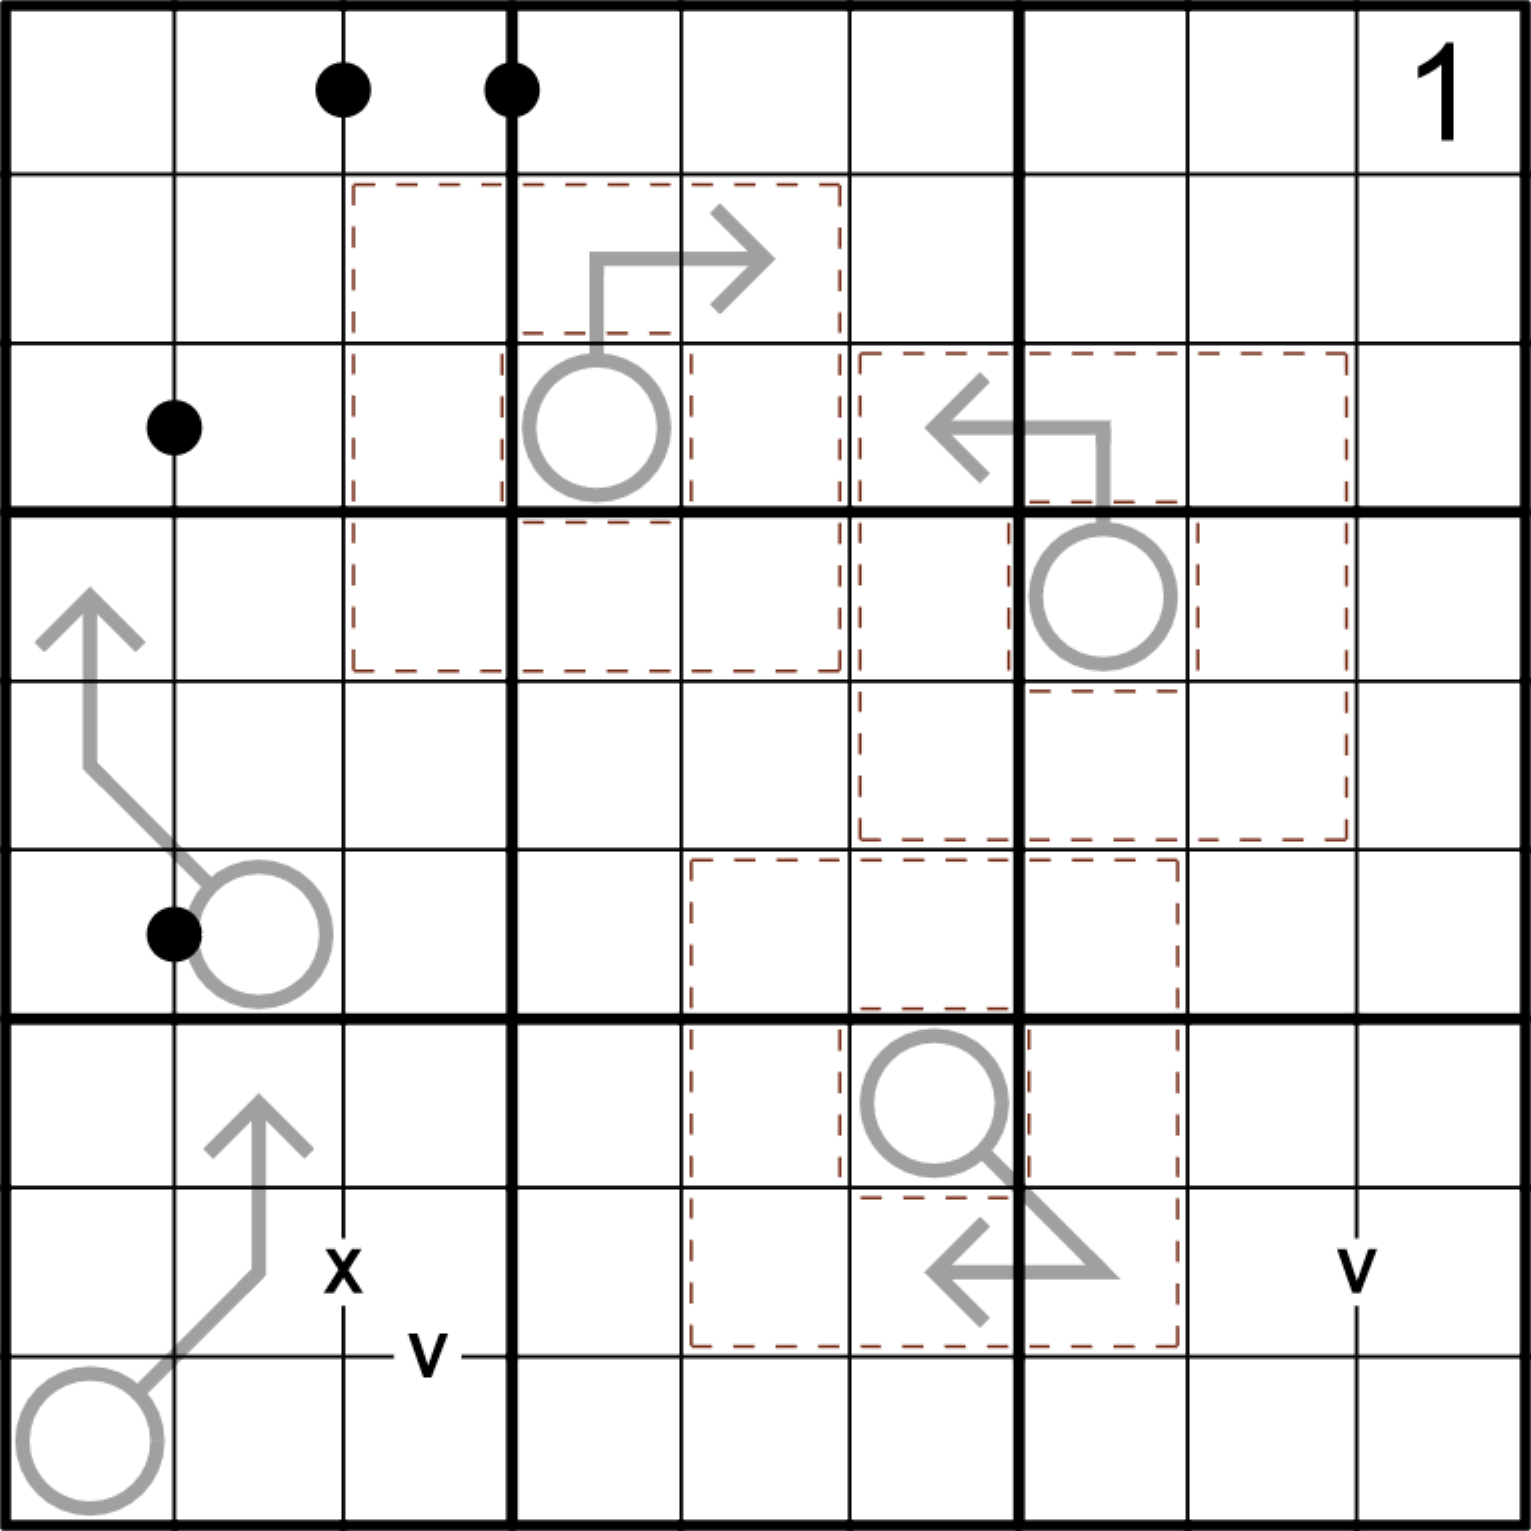 9x9 sudoku grid, R1C1 is topmost leftmost cell. 1 given on R1C9. Cogs are centered on R3C4 (arrow clockwise), R4C7 (arrow counterclockwise), and R7C6 (arrow clockwise). Sum arrows are R3C4 circled pointing at R2C4 and R2C5; R4C7 circled pointing at R3C7 and R3C6; R7C6 circled pointing at R8C7 and R8C6; R6C2 circled pointing at R5C1 and R4C1; R9C1 circled pointing at R8C2 and R7C2. X between R8C2 and R8C3. V between R8C3 and R9C3; and between R8C8 and R8C9. Black dots between R1C2 and R1C3; between R1C3 and R1C4; between R3C1 and R3C2; between R6C1 and R6C2.